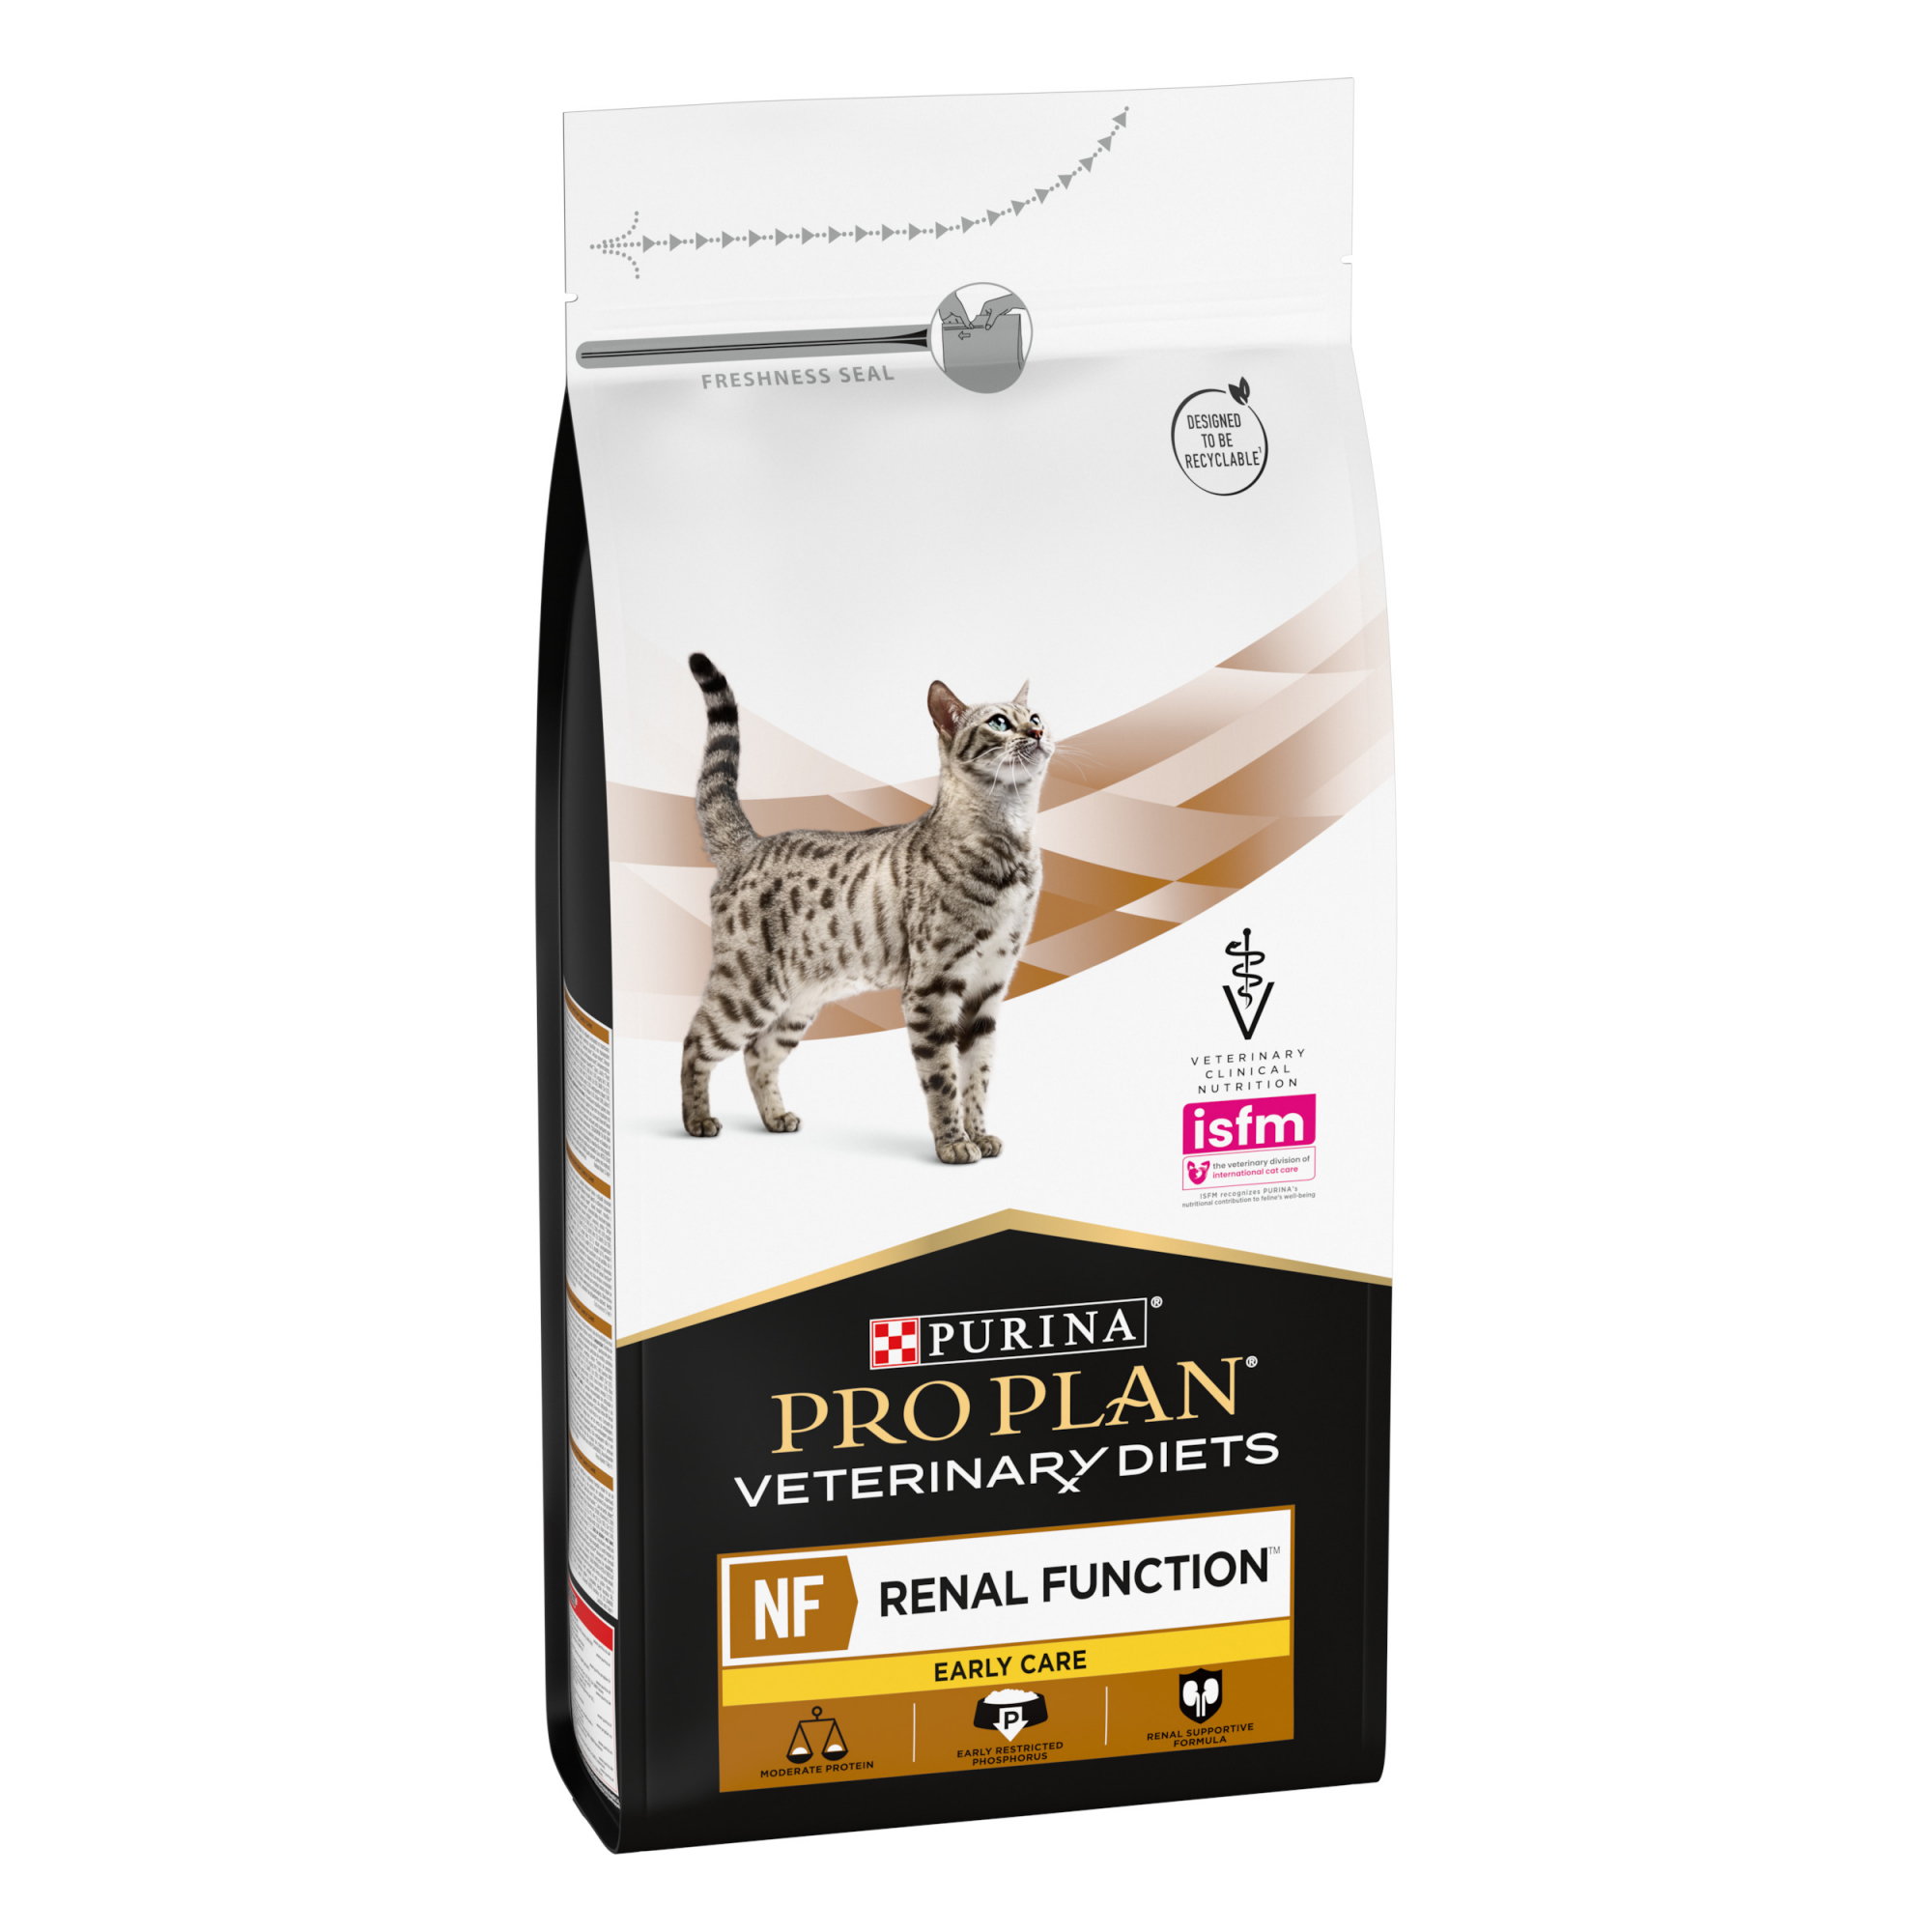 PRO PLAN Veterinary Diets Feline NF ST/OX Renal Function Early Care